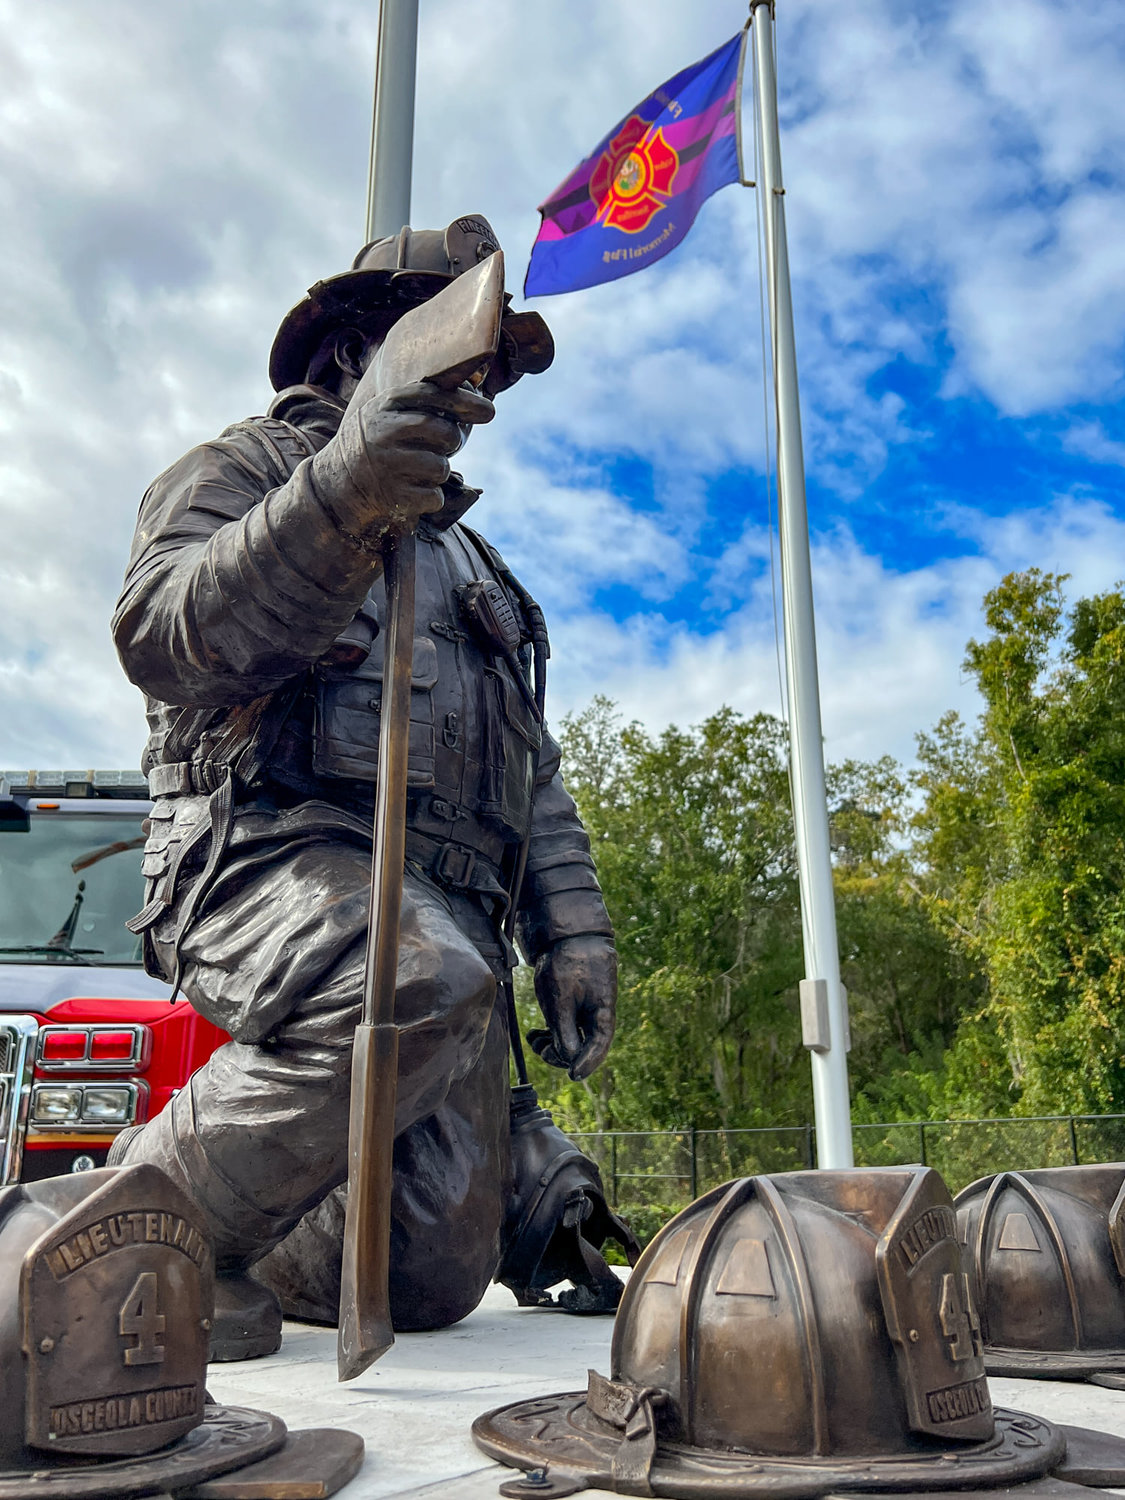 A new memorial created by Bronze Depot, honoring firefighters who died in the line of duty, will be coming to the North Merrick Fire Department sometime this summer. It will resemble, though differ slightly from, the statue above, which was created for a department in Osceola, Fla.